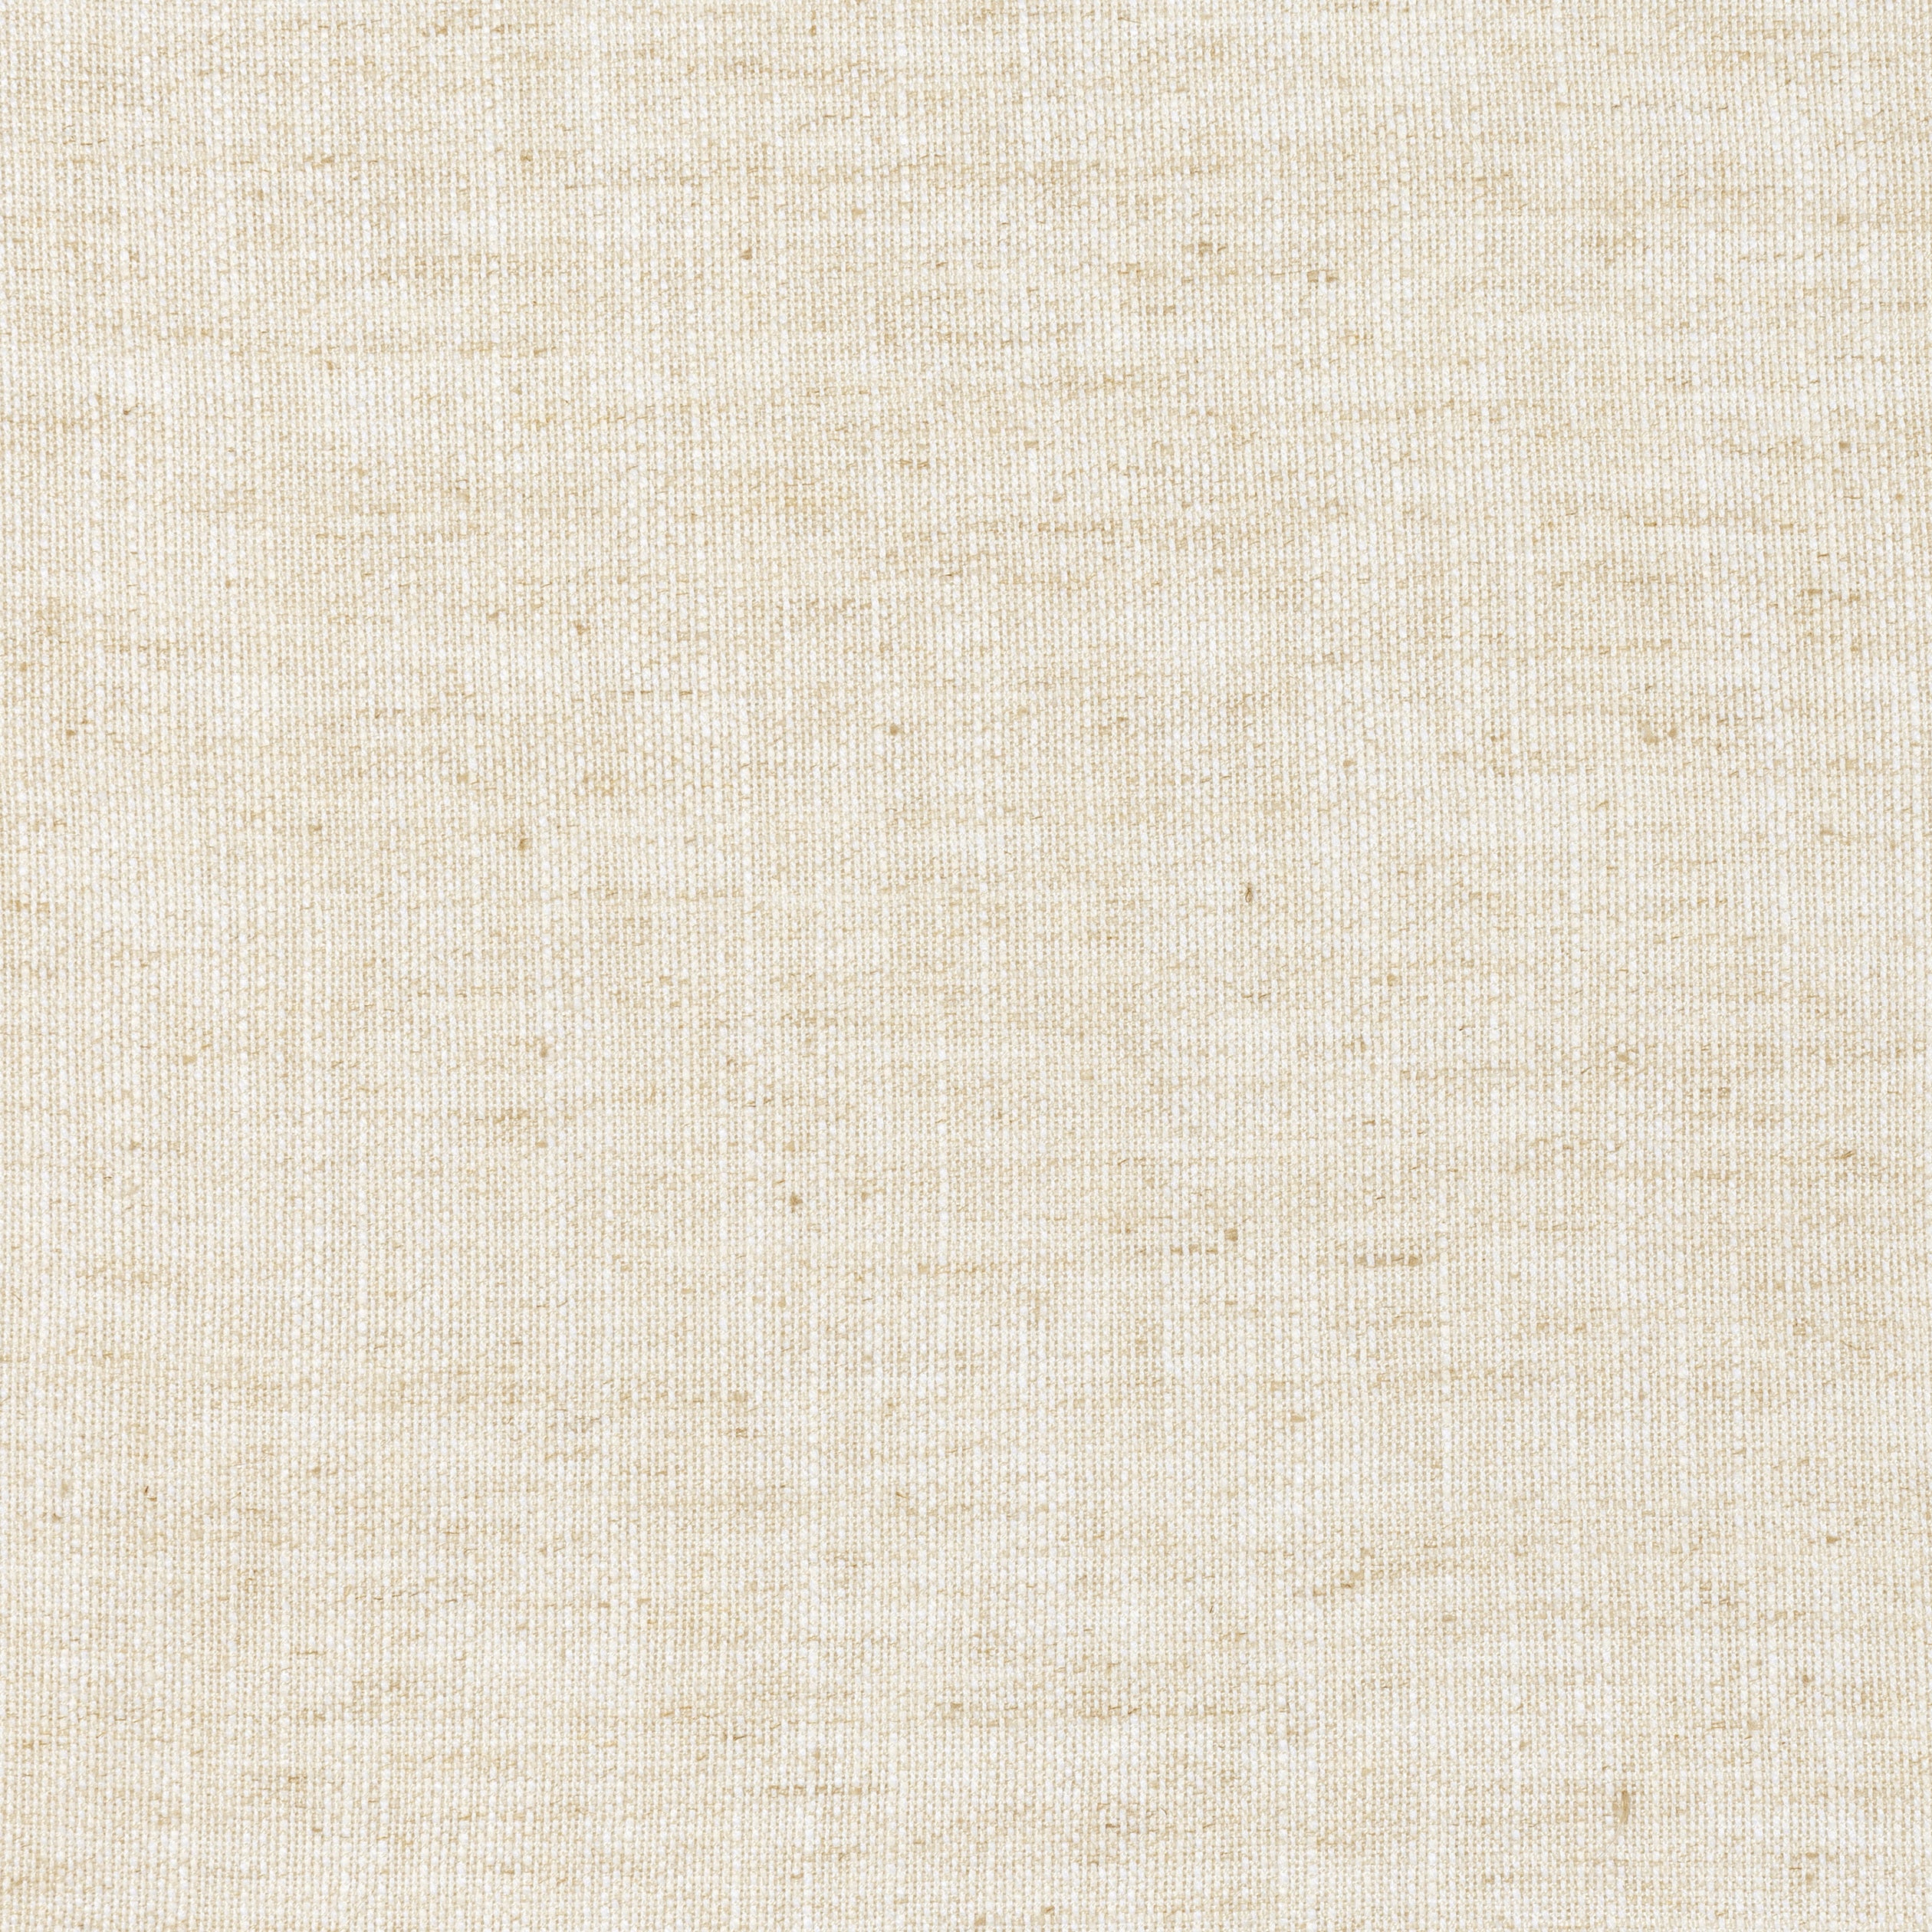 Terra Linen fabric in linen color - pattern number FWW7676 - by Thibaut in the Palisades collection